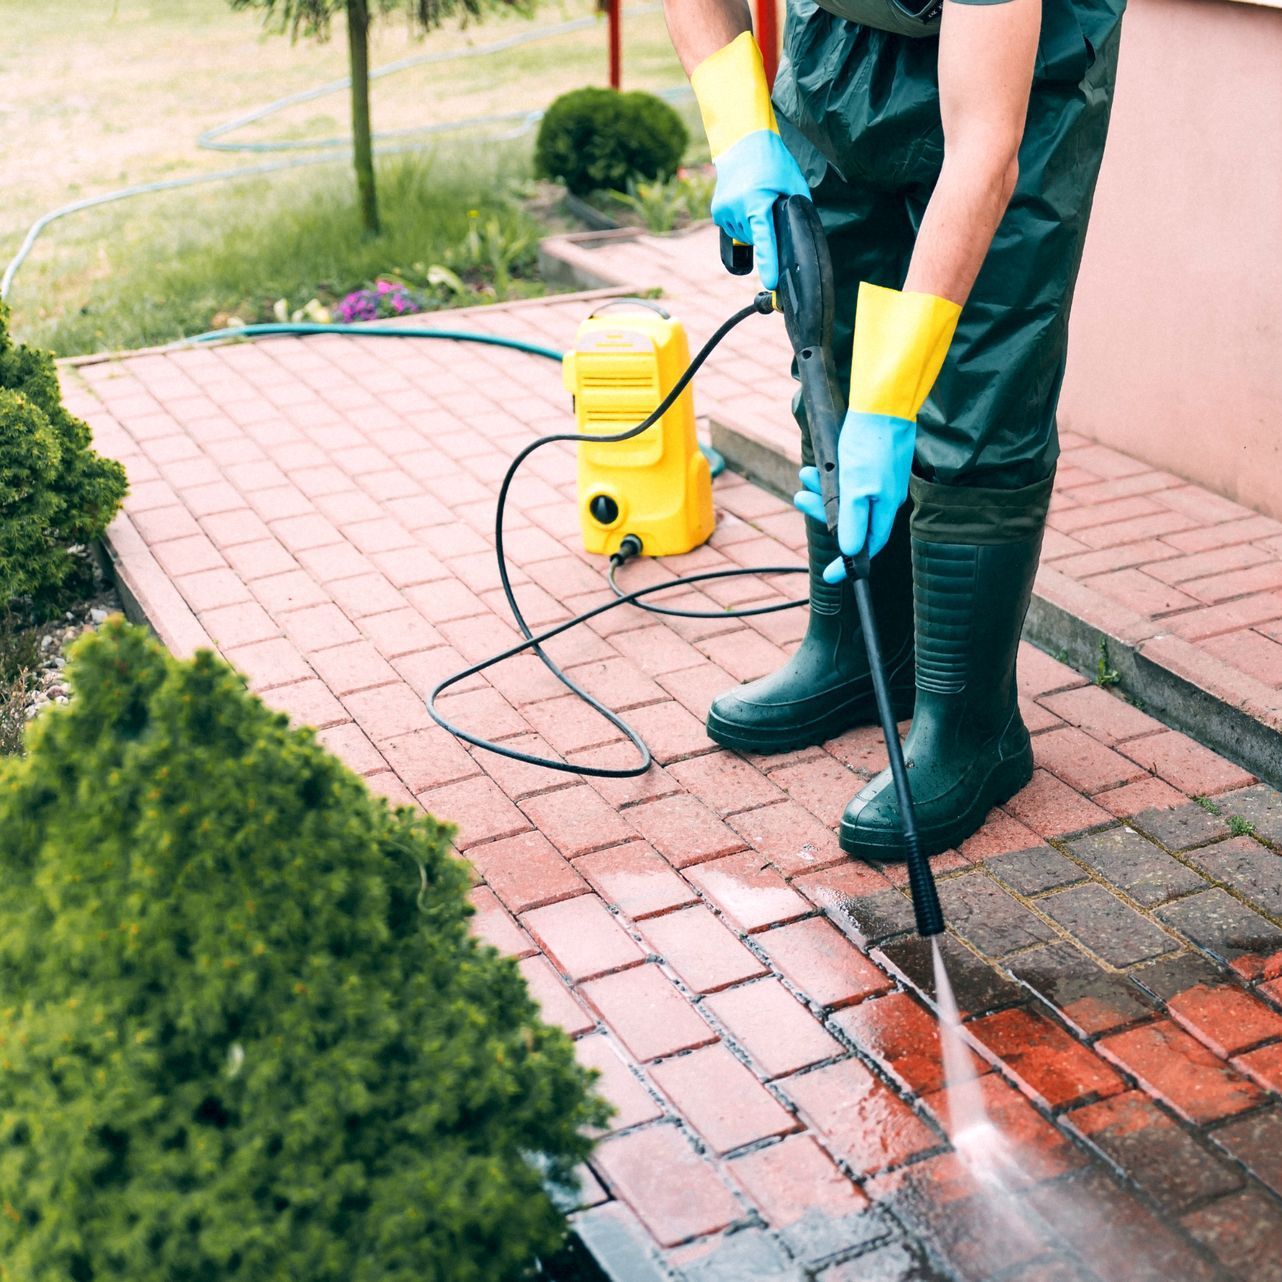 a person is using a high pressure washer on a brick sidewalk